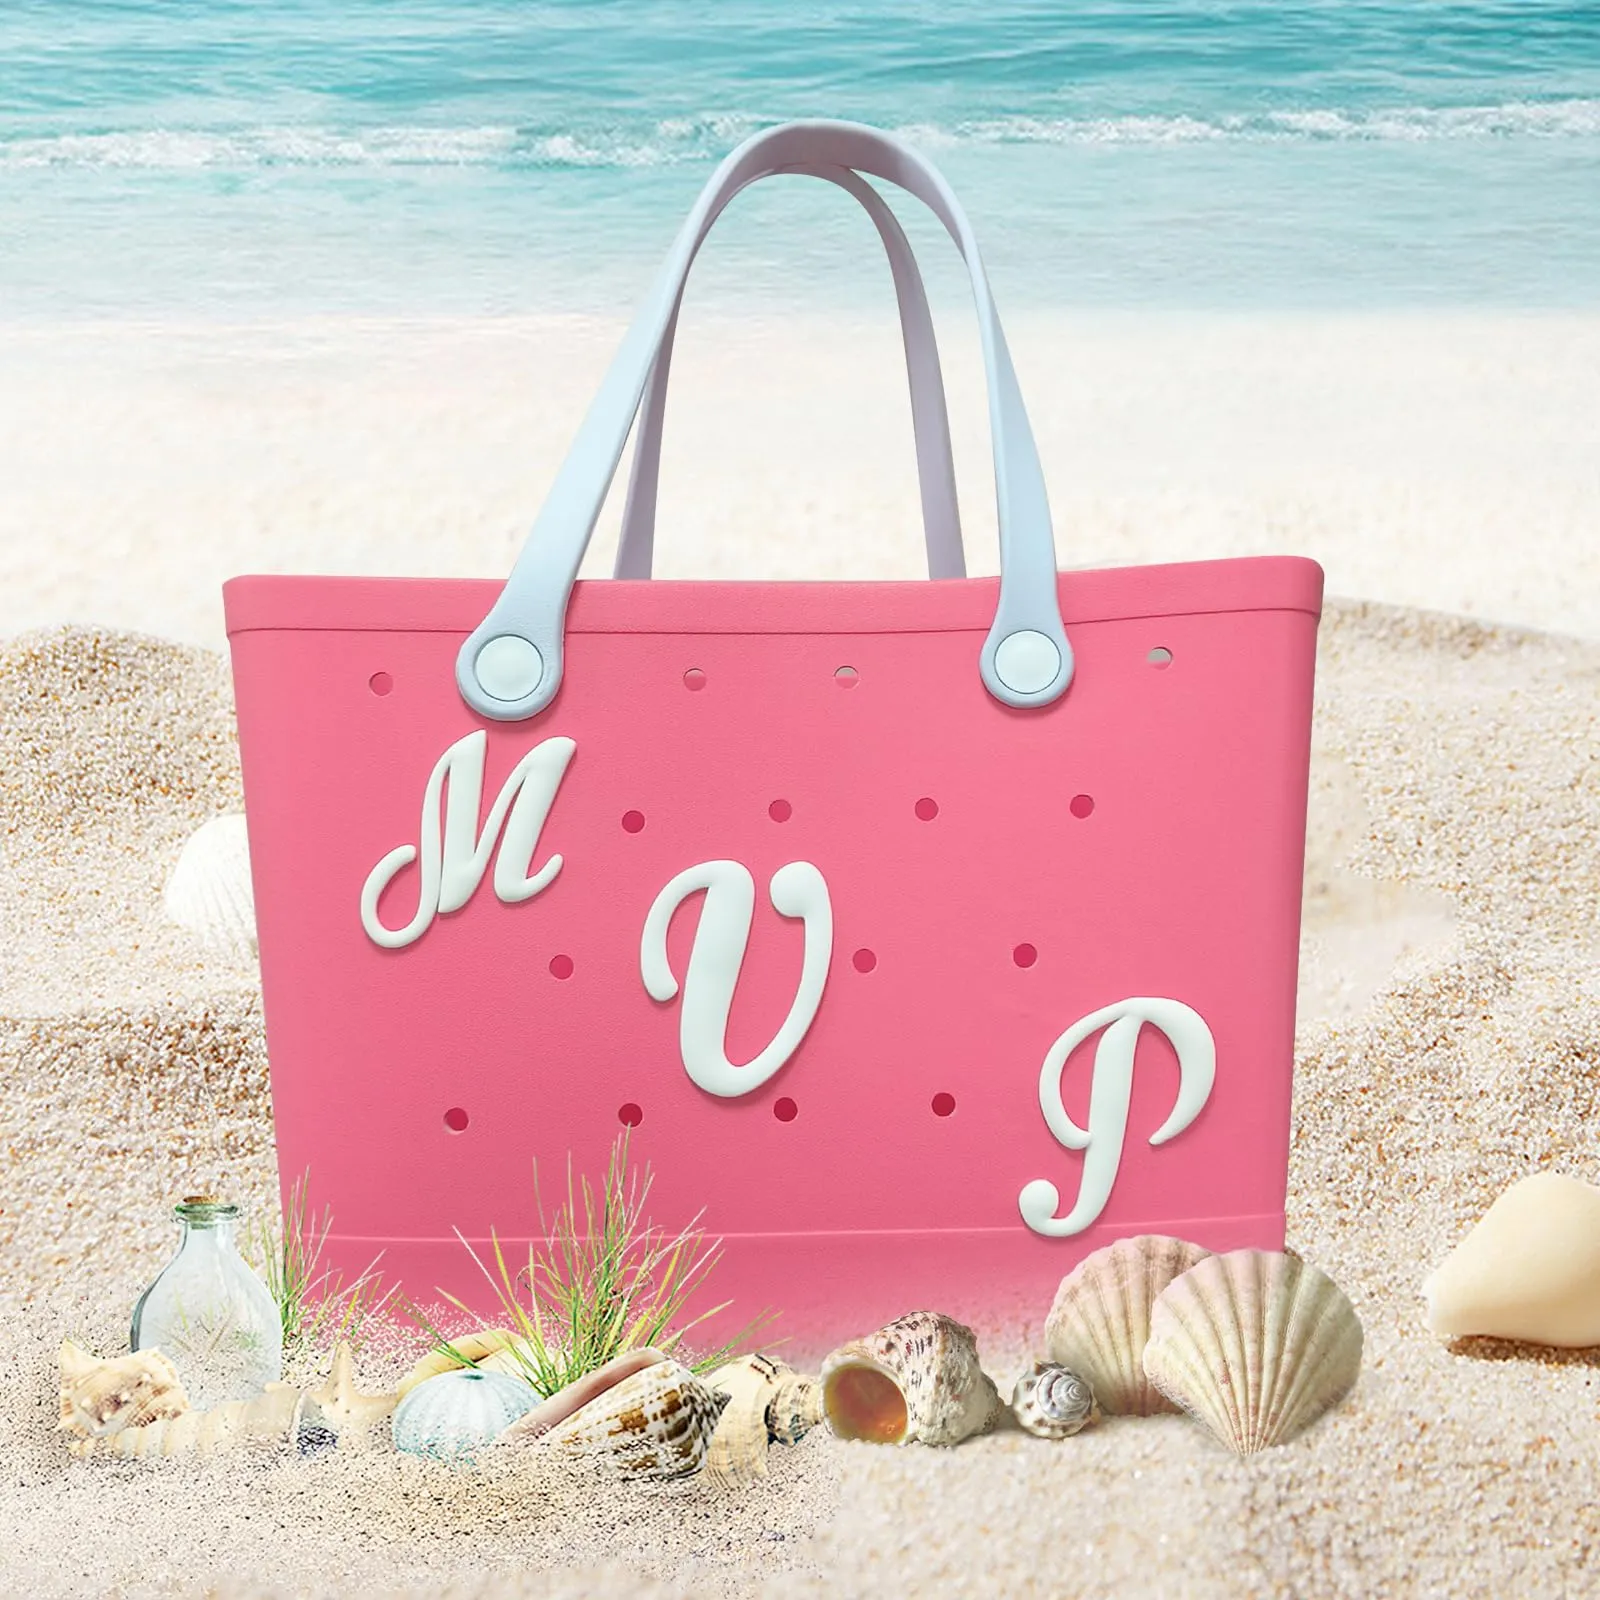 bag charms compatible with bogg bag accessories insert decorative alphabet lettering for bogg bag personalize your beach tote rubber beach bag accessories with alphabet letters c